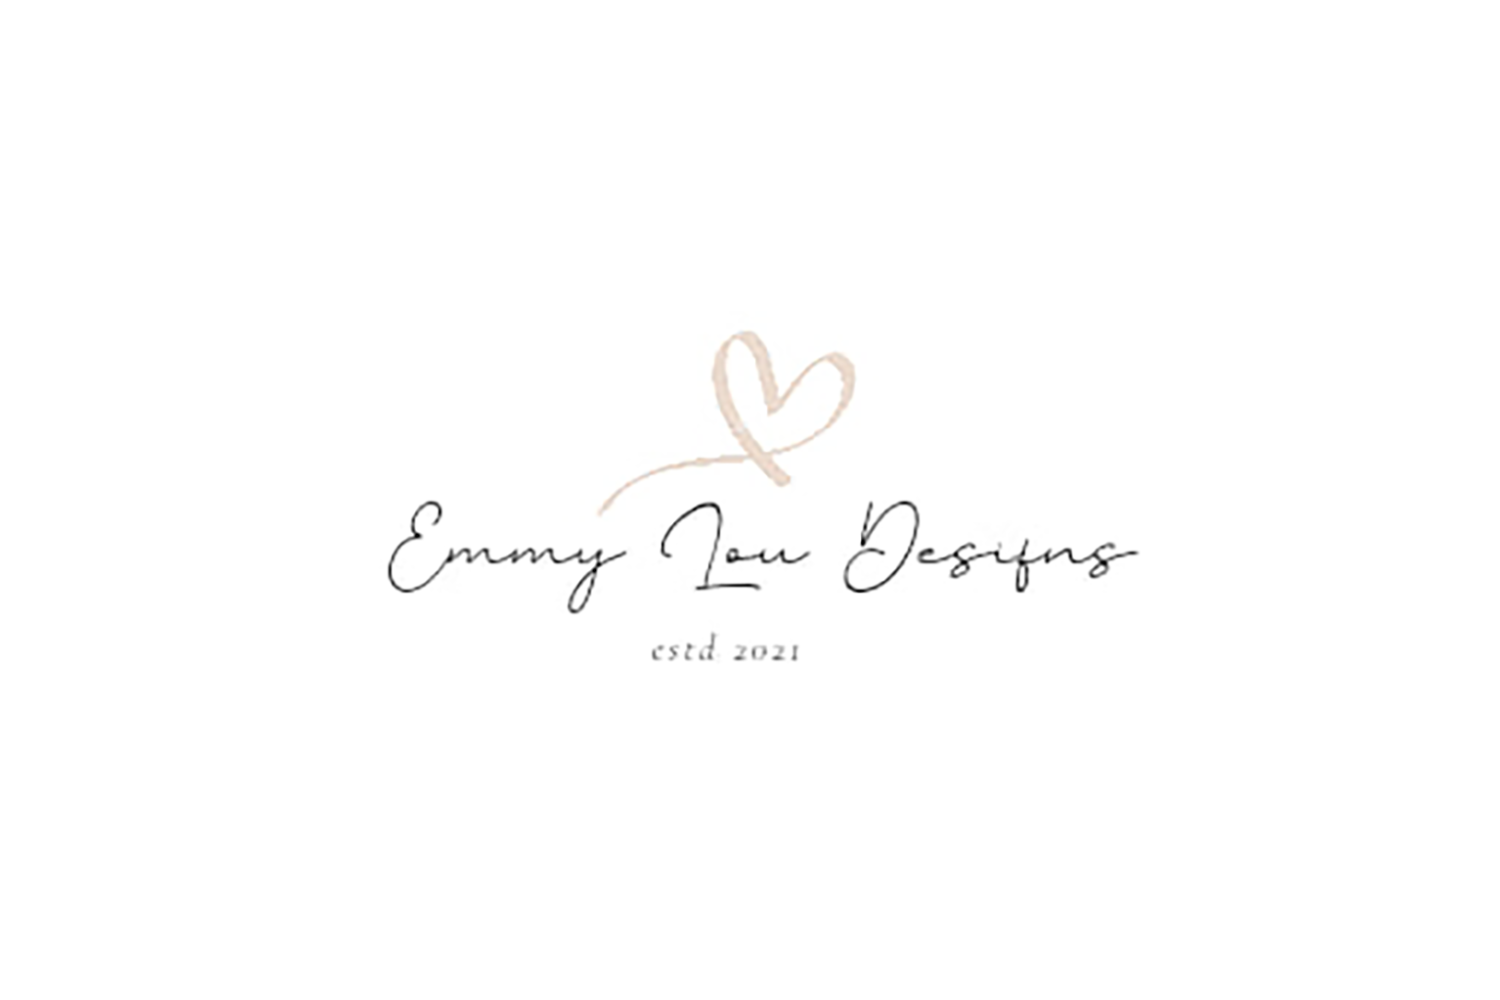 The official logo of Emmy Lou Designs of Chester, West Virginia 